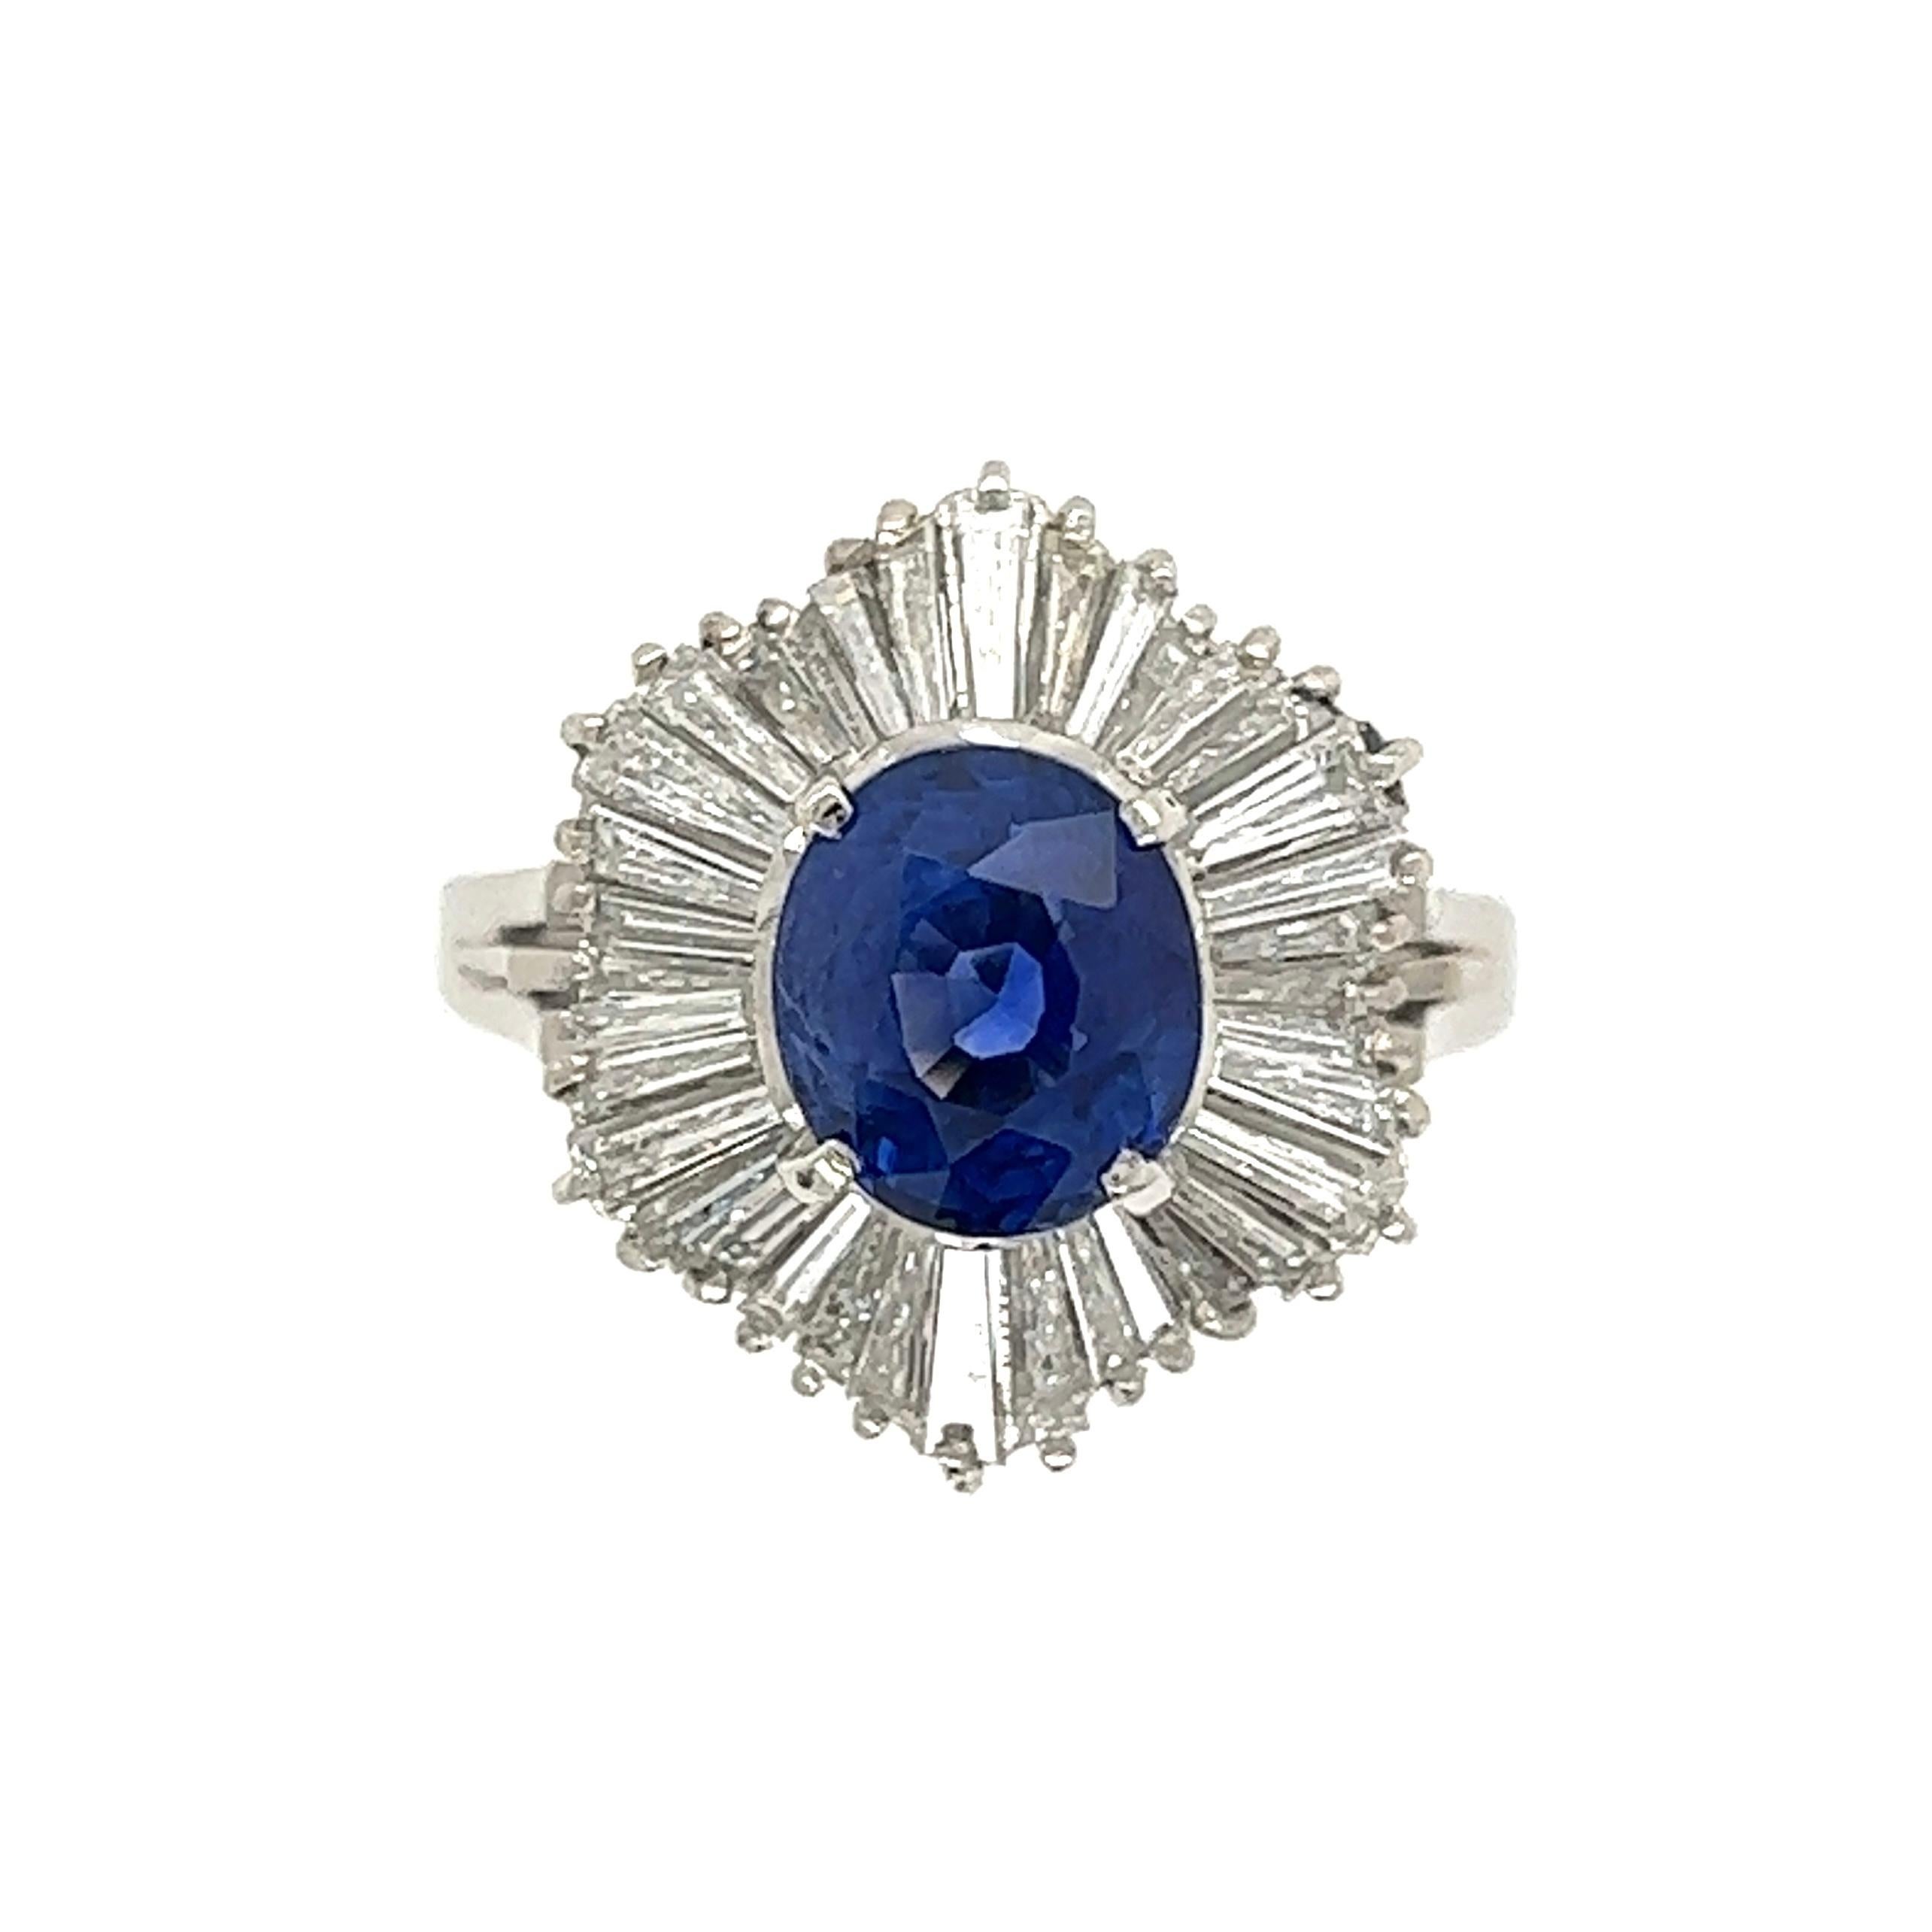 Simply Beautiful! Finely crafted Blue Sapphire Cocktail ring, center securely set with a 2.35 Carat Sapphire, surrounded by Baguette Diamonds, H color, VS/SI (clean and white!), weighing approx. 1.18tcw. Hand crafted Platinum mounting. Approx.